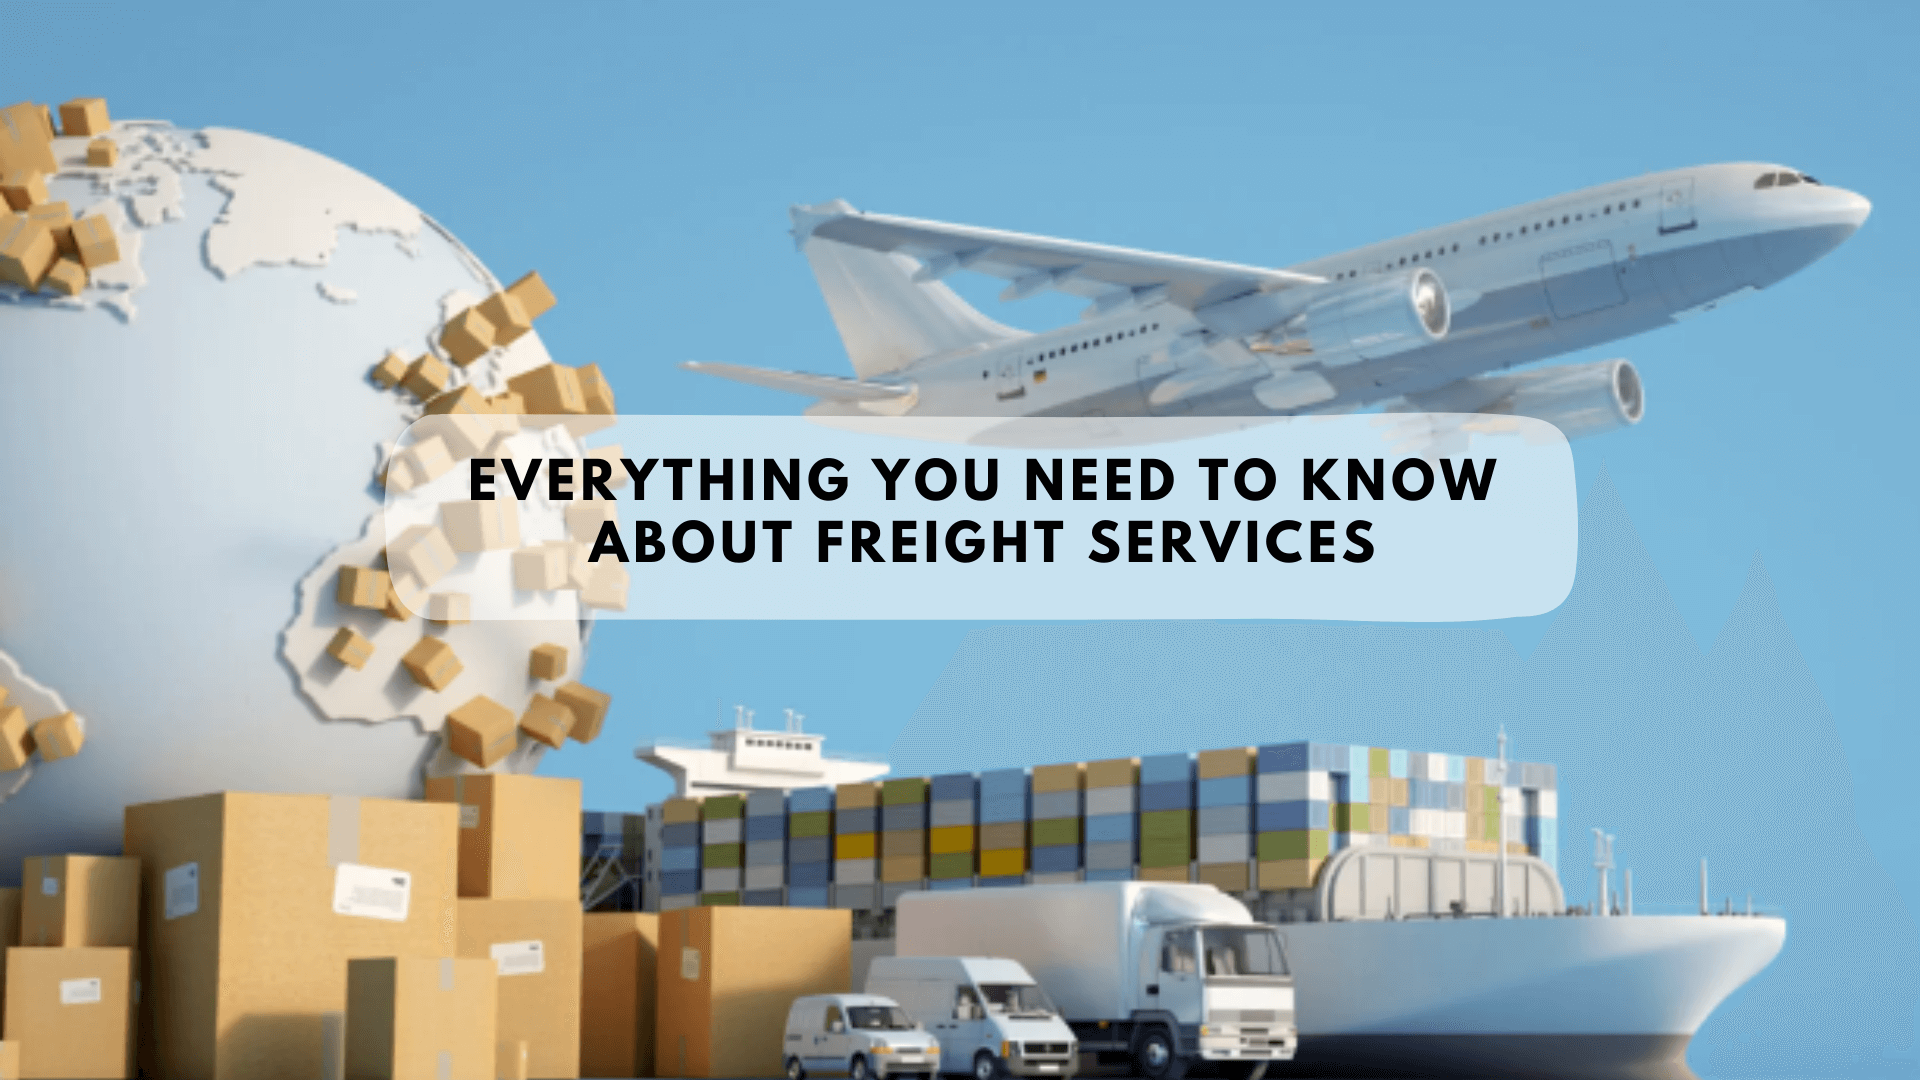 Freight Services: Your Essential Guide